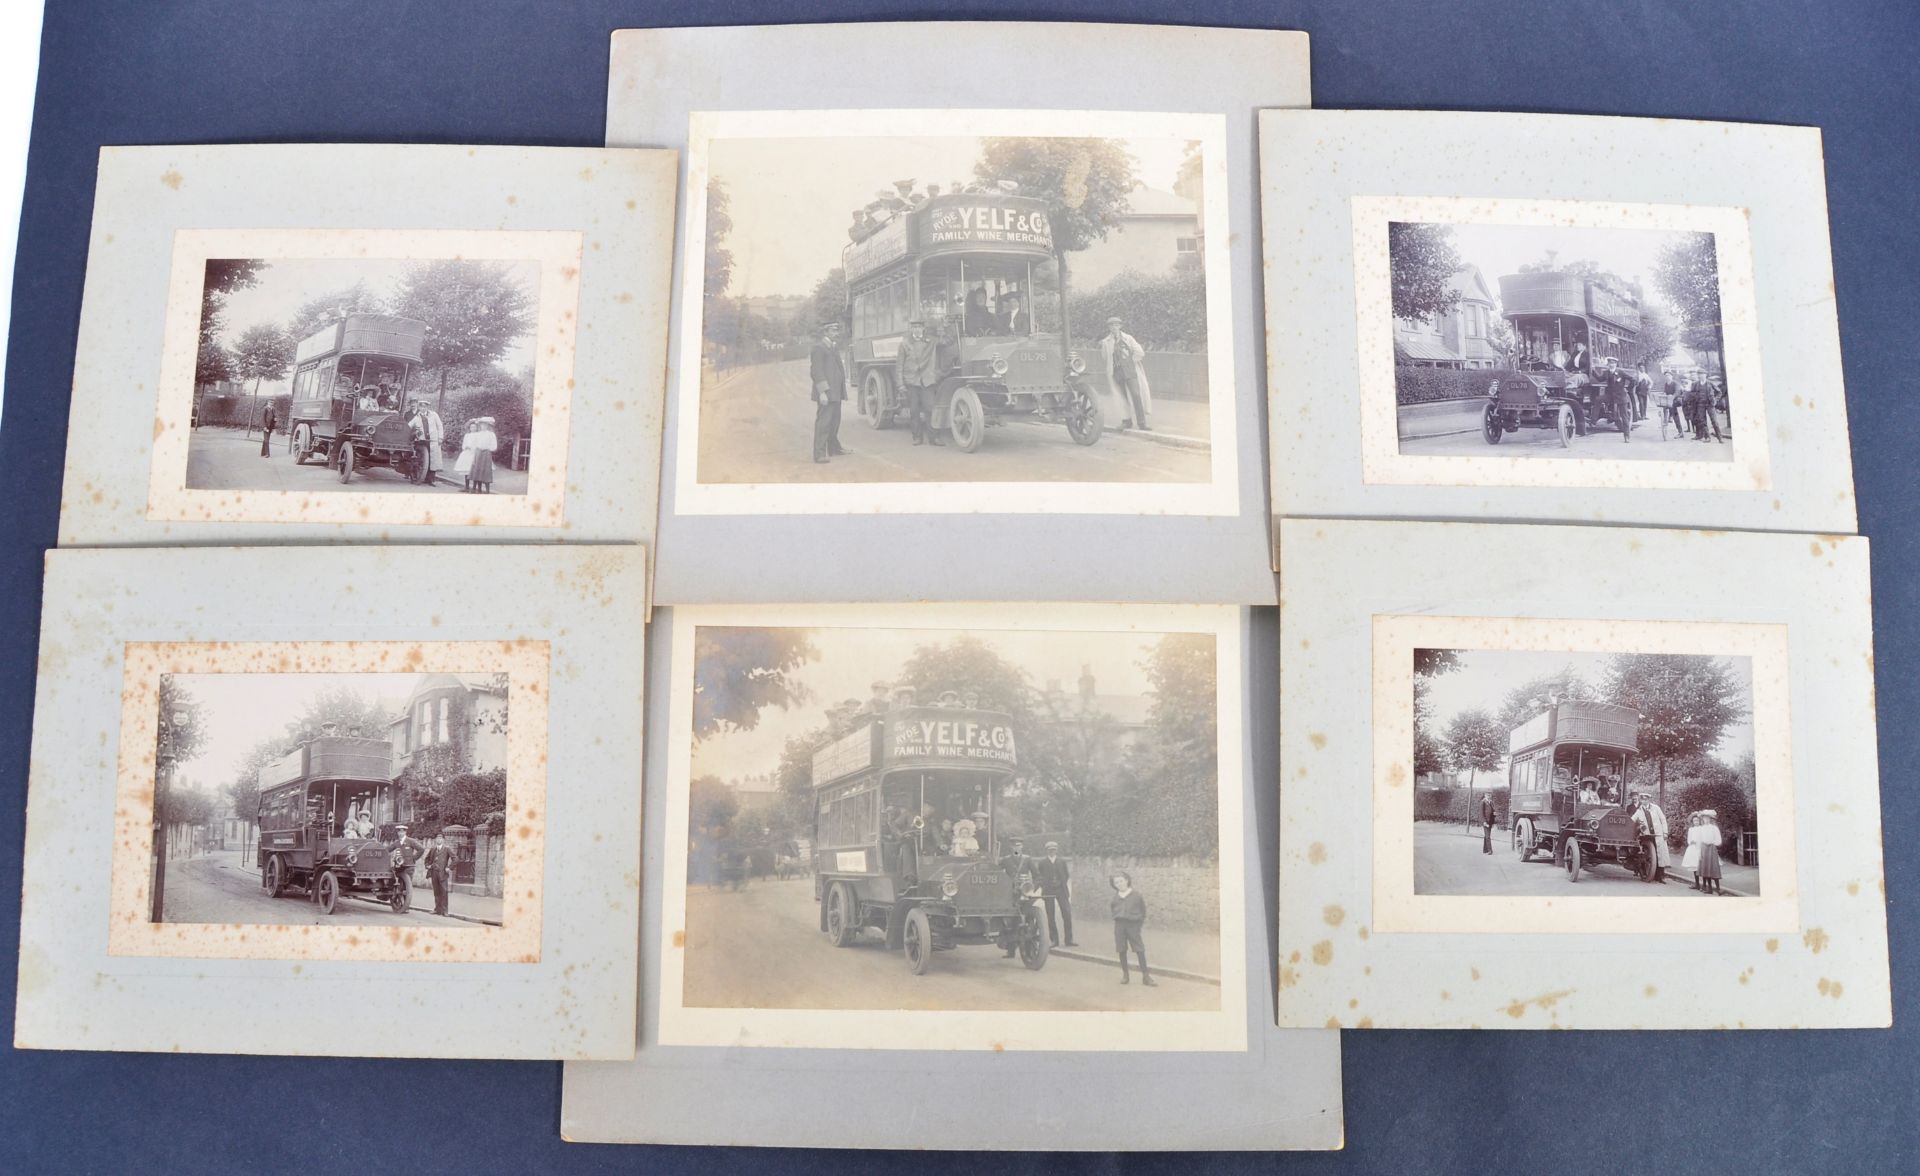 EARLY 20TH CENTURY BUS PHOTOGRAPHS - ISLE OF WIGHT